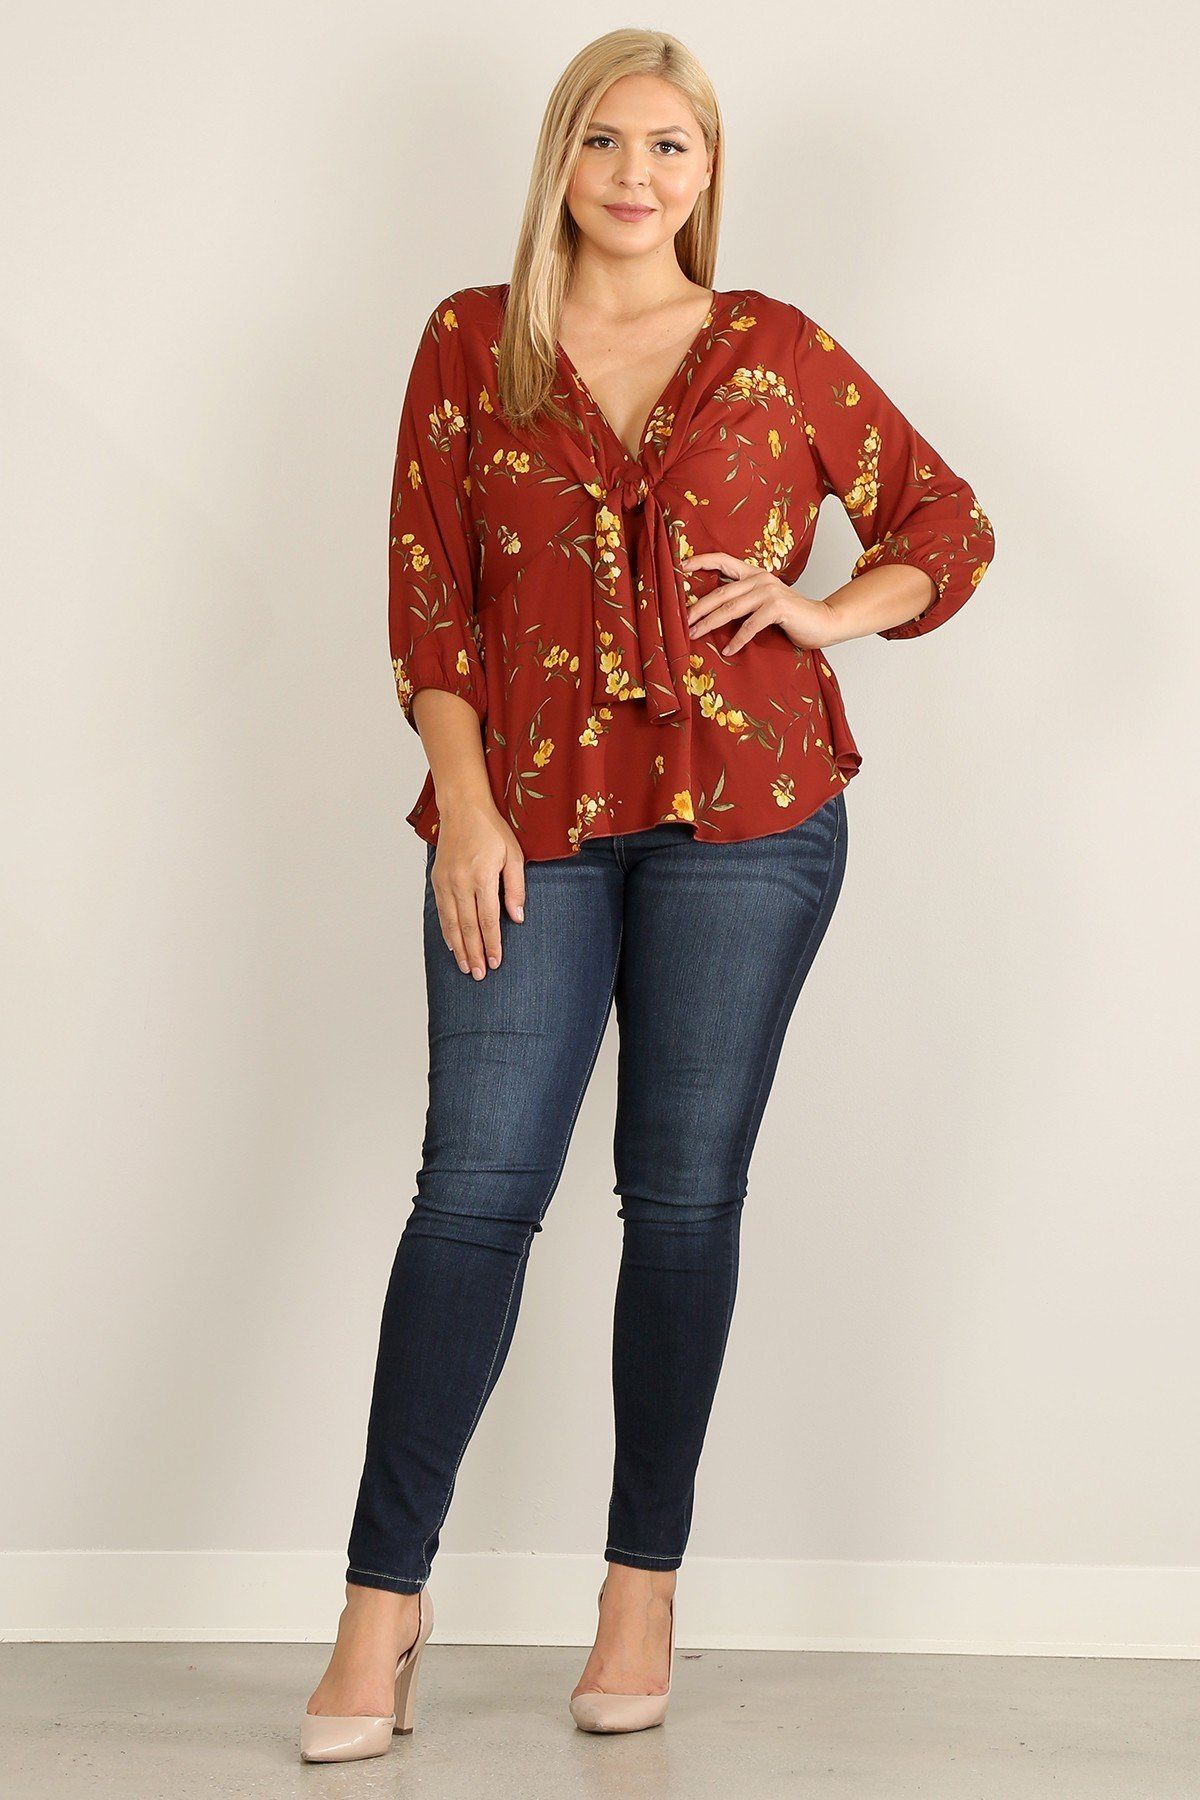 Plus Size Floral Print 3/4 Sleeve Top With V-neckline And Relaxed Fit - Dignitestore